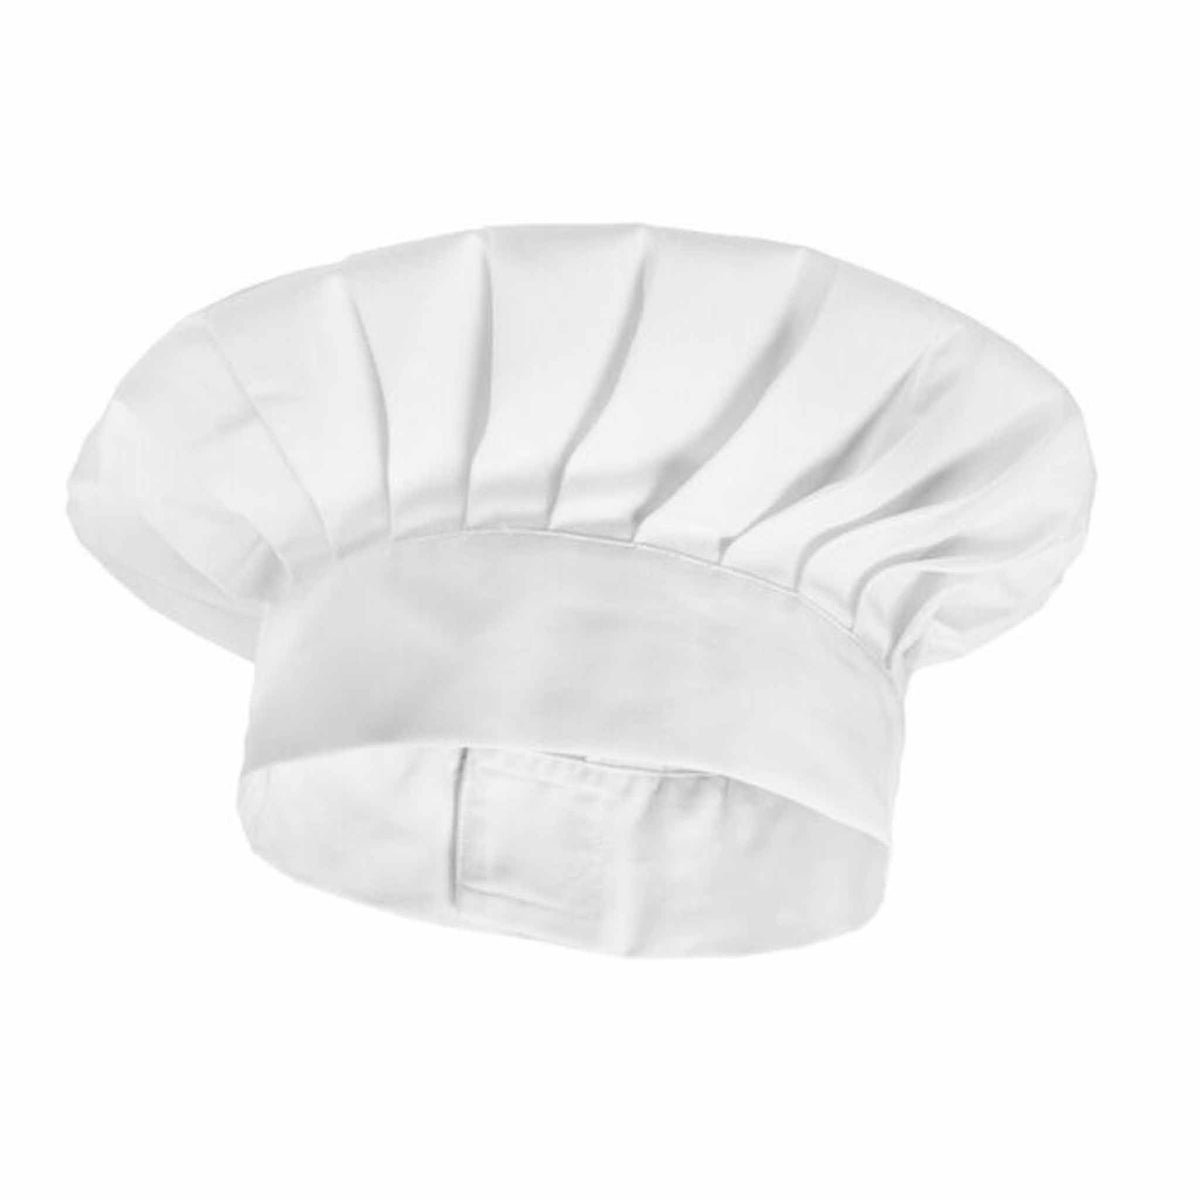 traditional white chefs hat